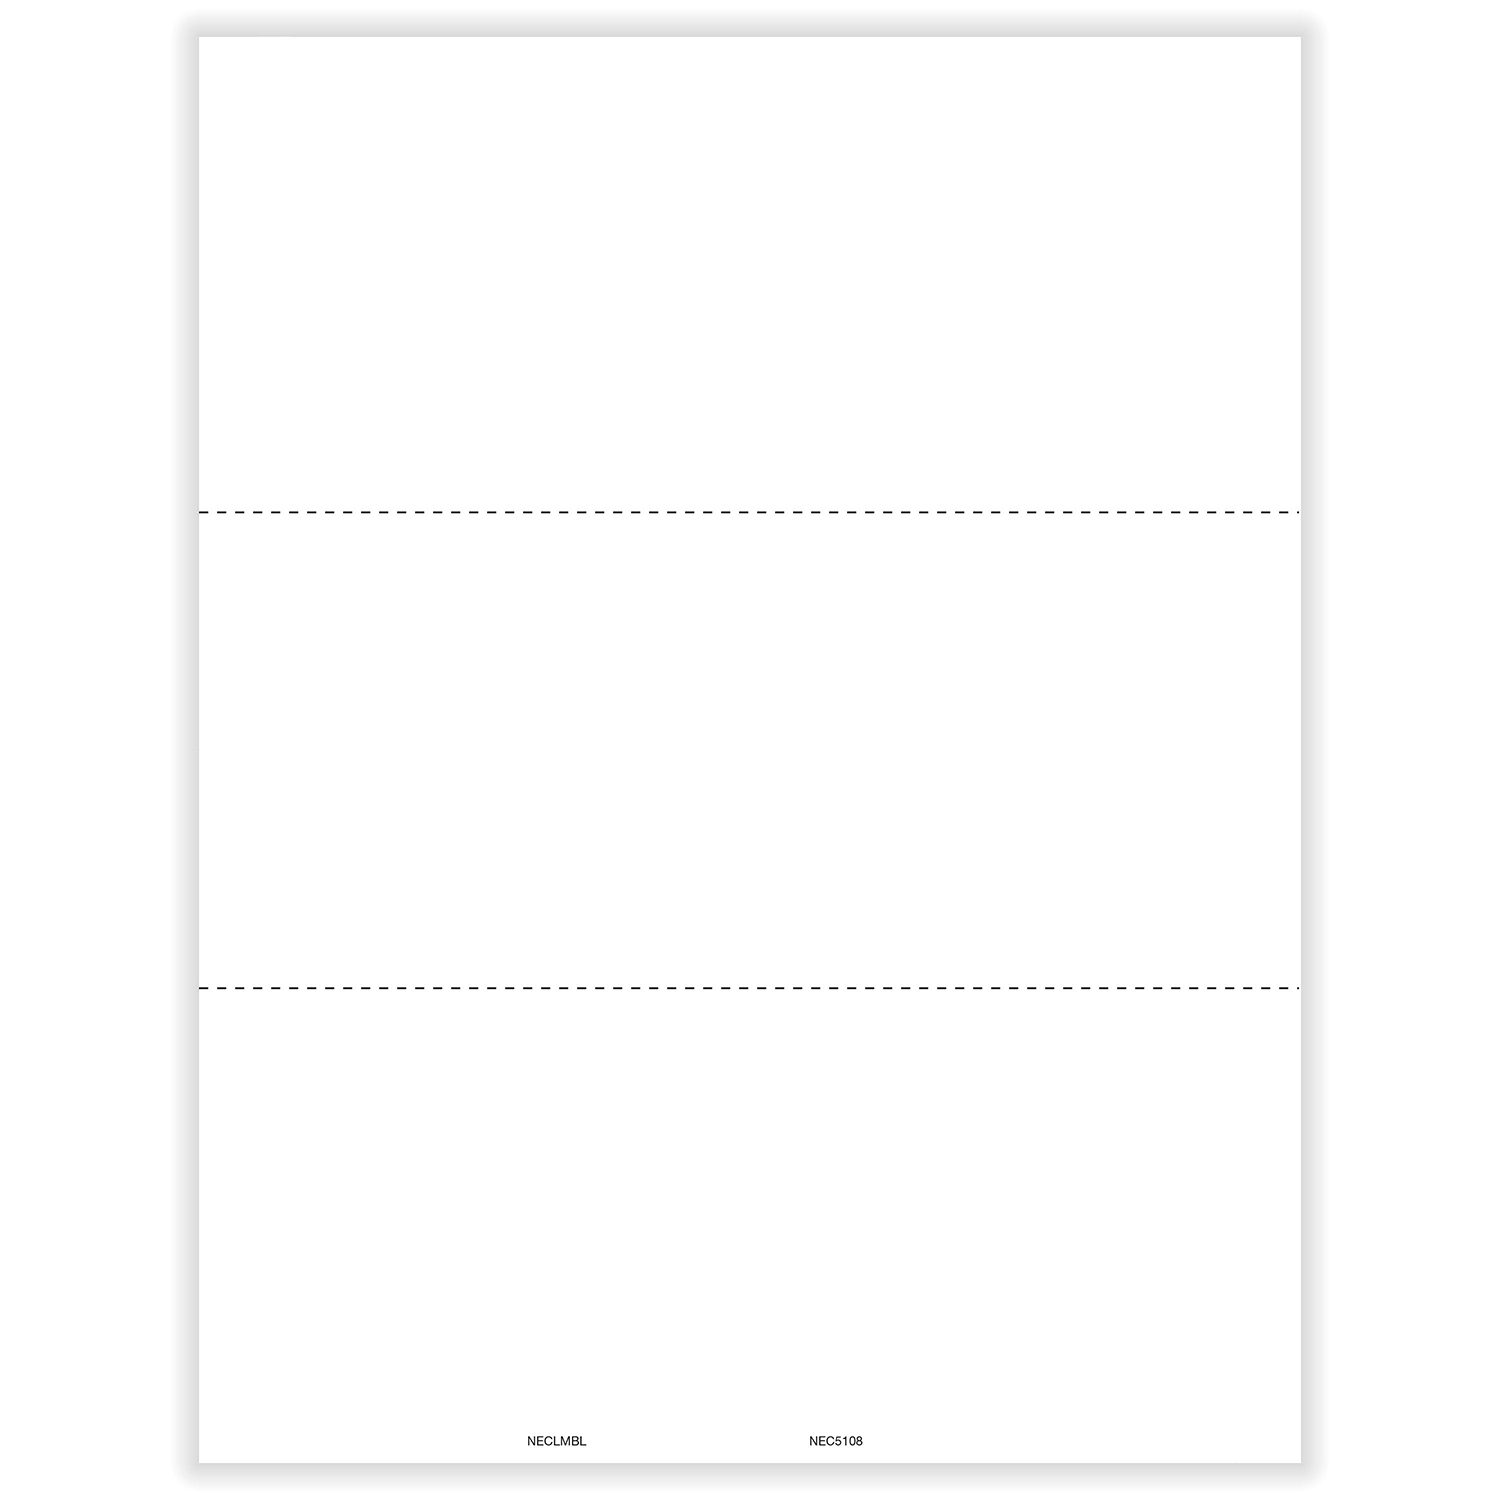 Picture of 1099-NEC Blank, Copy B, 3-Up, w/ Backer Instructions (1,500 Forms)